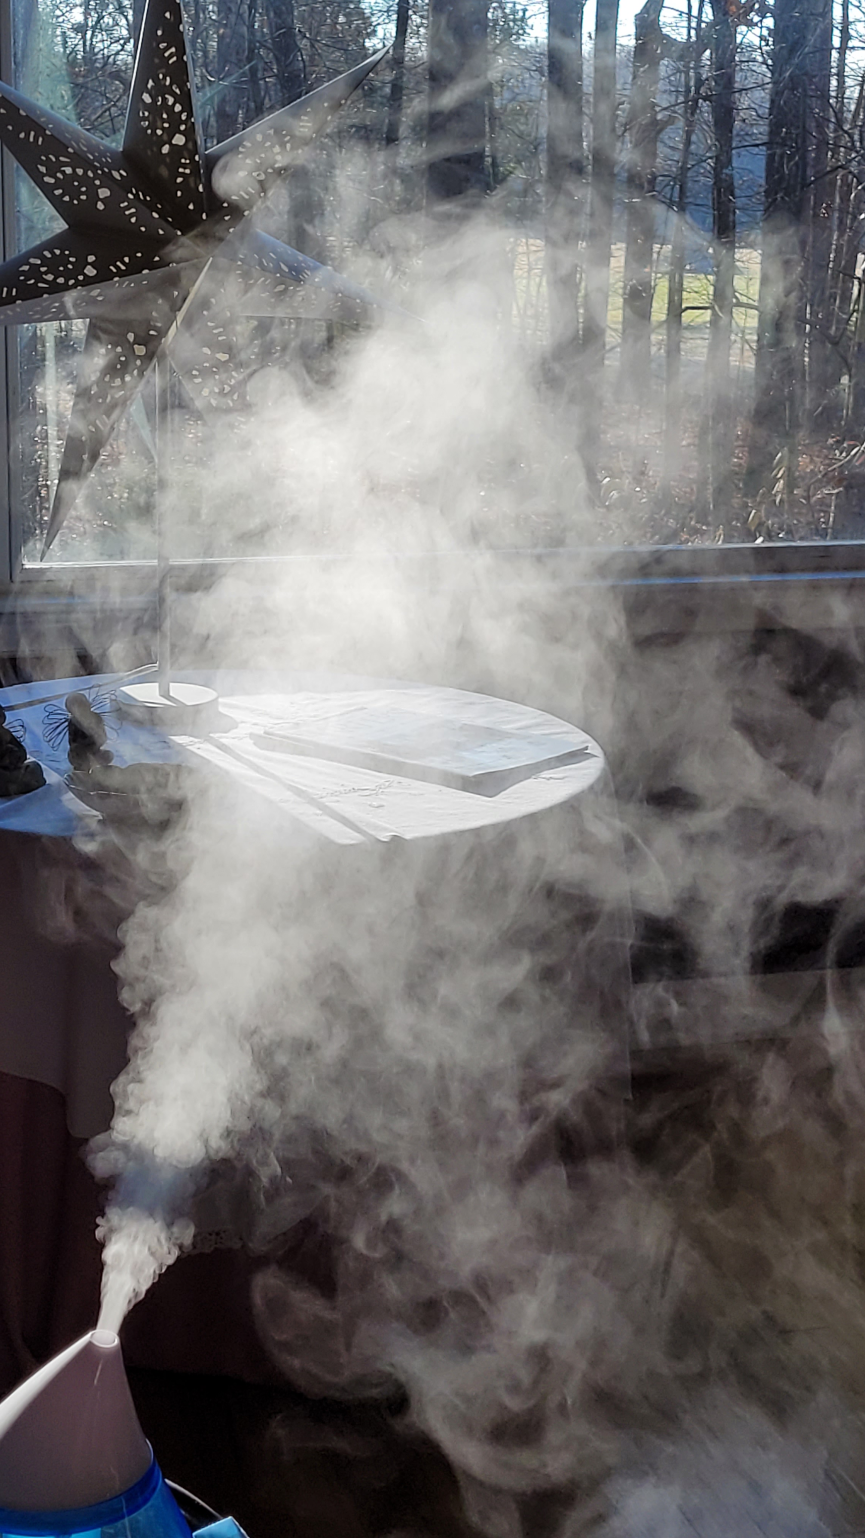 Water vapor from a humidifier